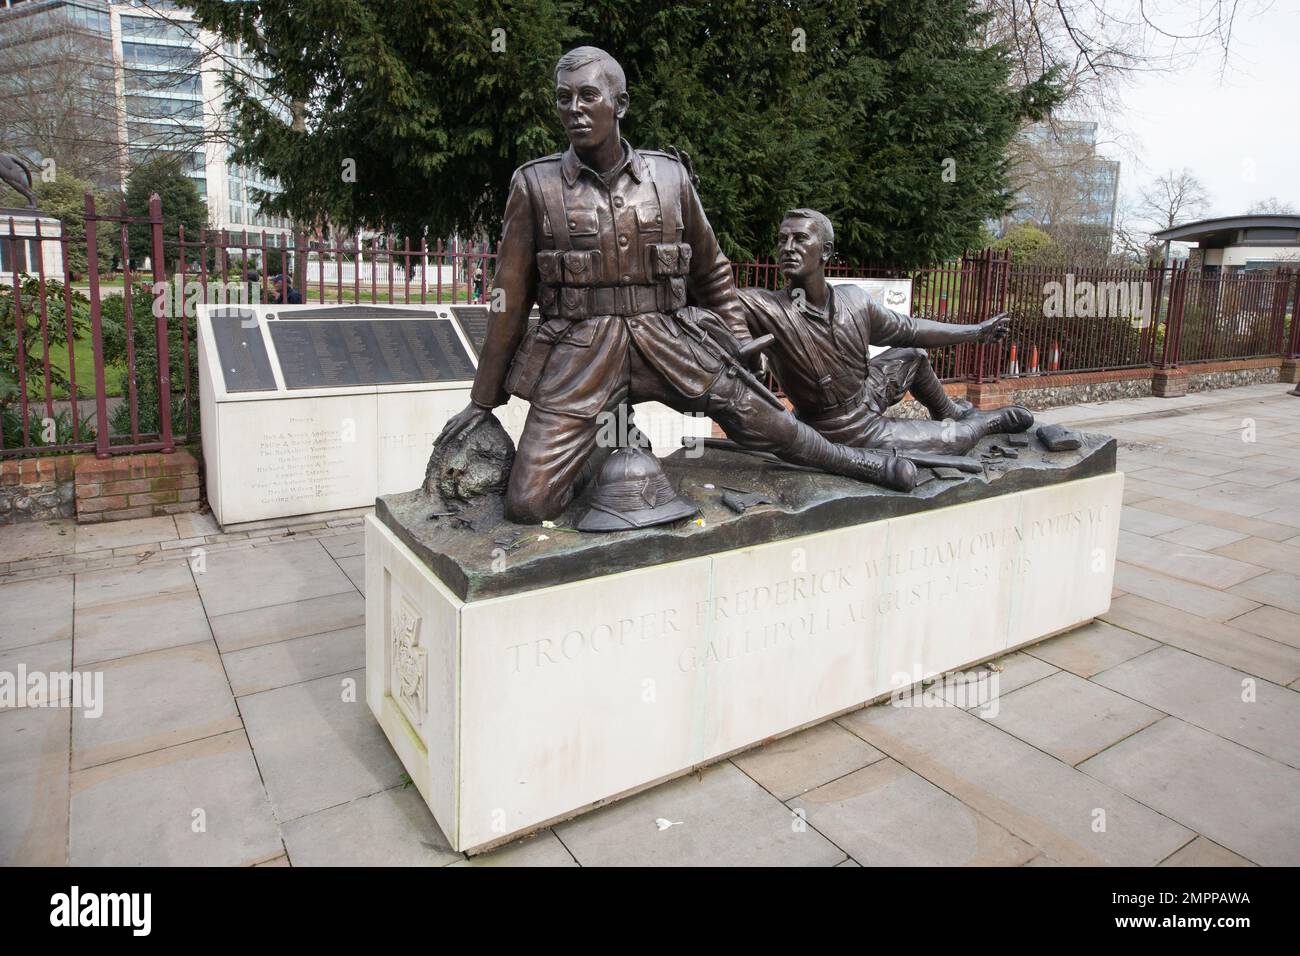 Trooper Potts Memorial Statue at Abbots walk in Reading in the UK Stock Photo